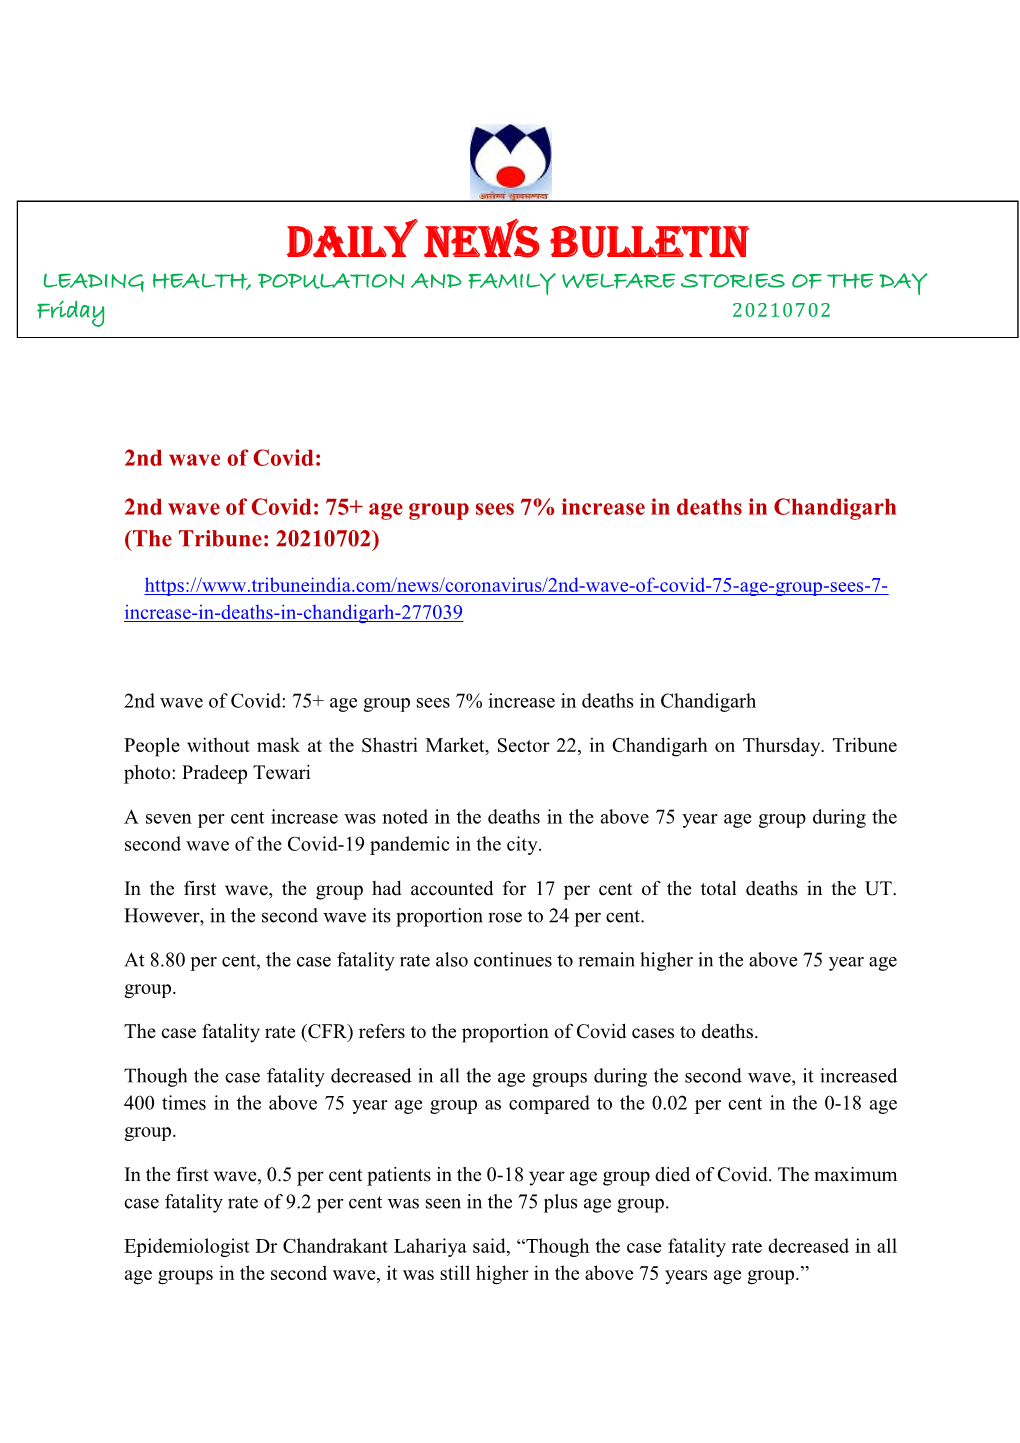 DAILY NEWS BULLETIN LEADING HEALTH, POPULATION and FAMILY WELFARE STORIES of the DAY Friday 20210702